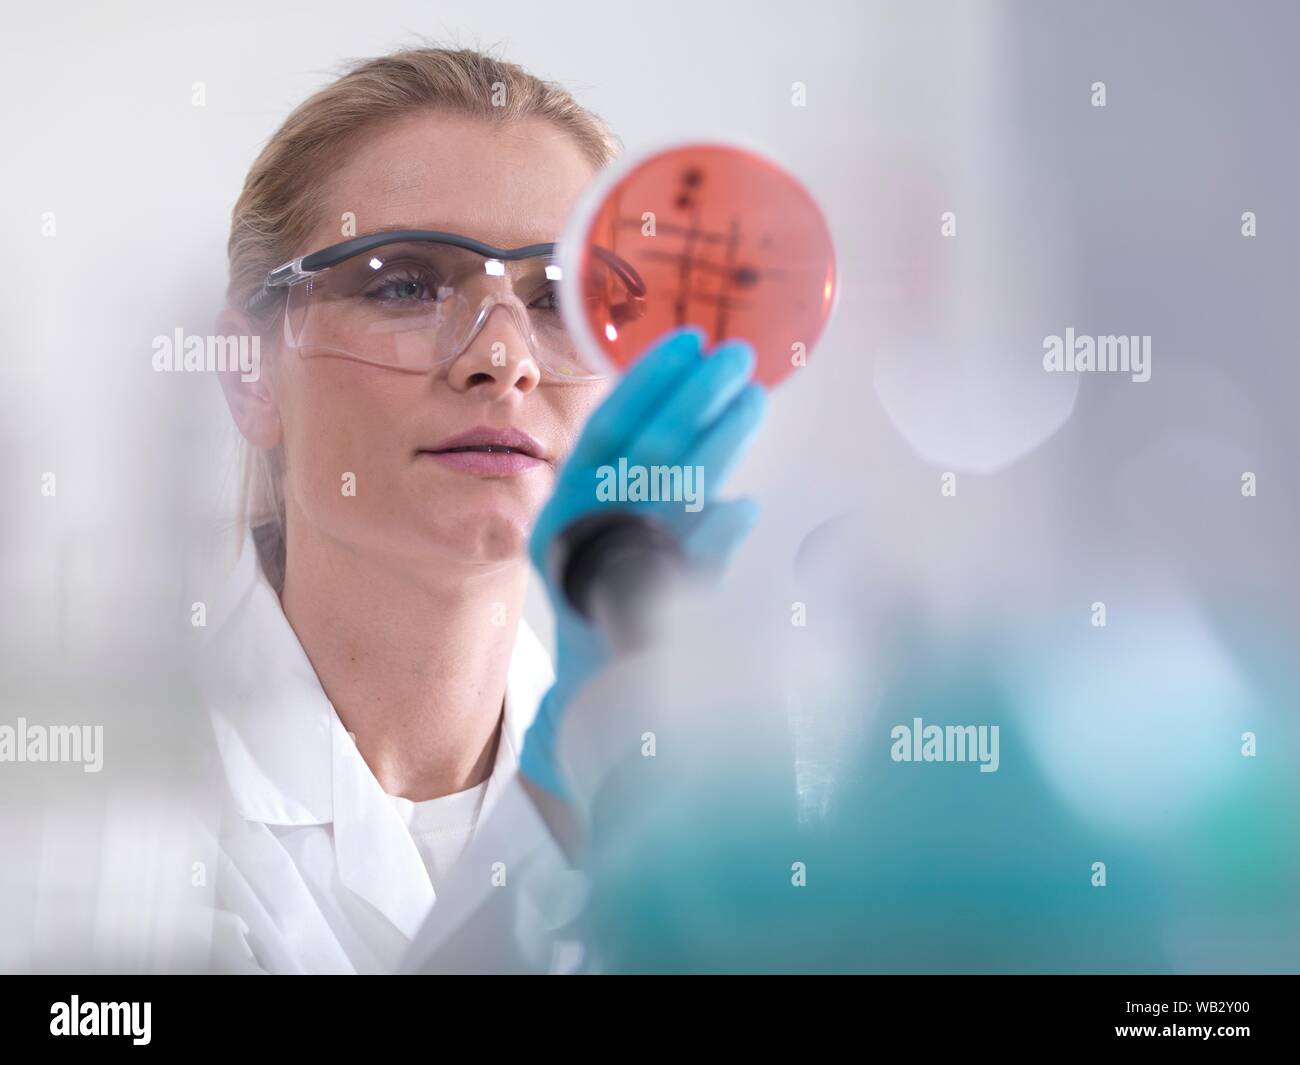 Microbiology research. Scientist examining bacterial cultures growing in petri dishes. Stock Photo